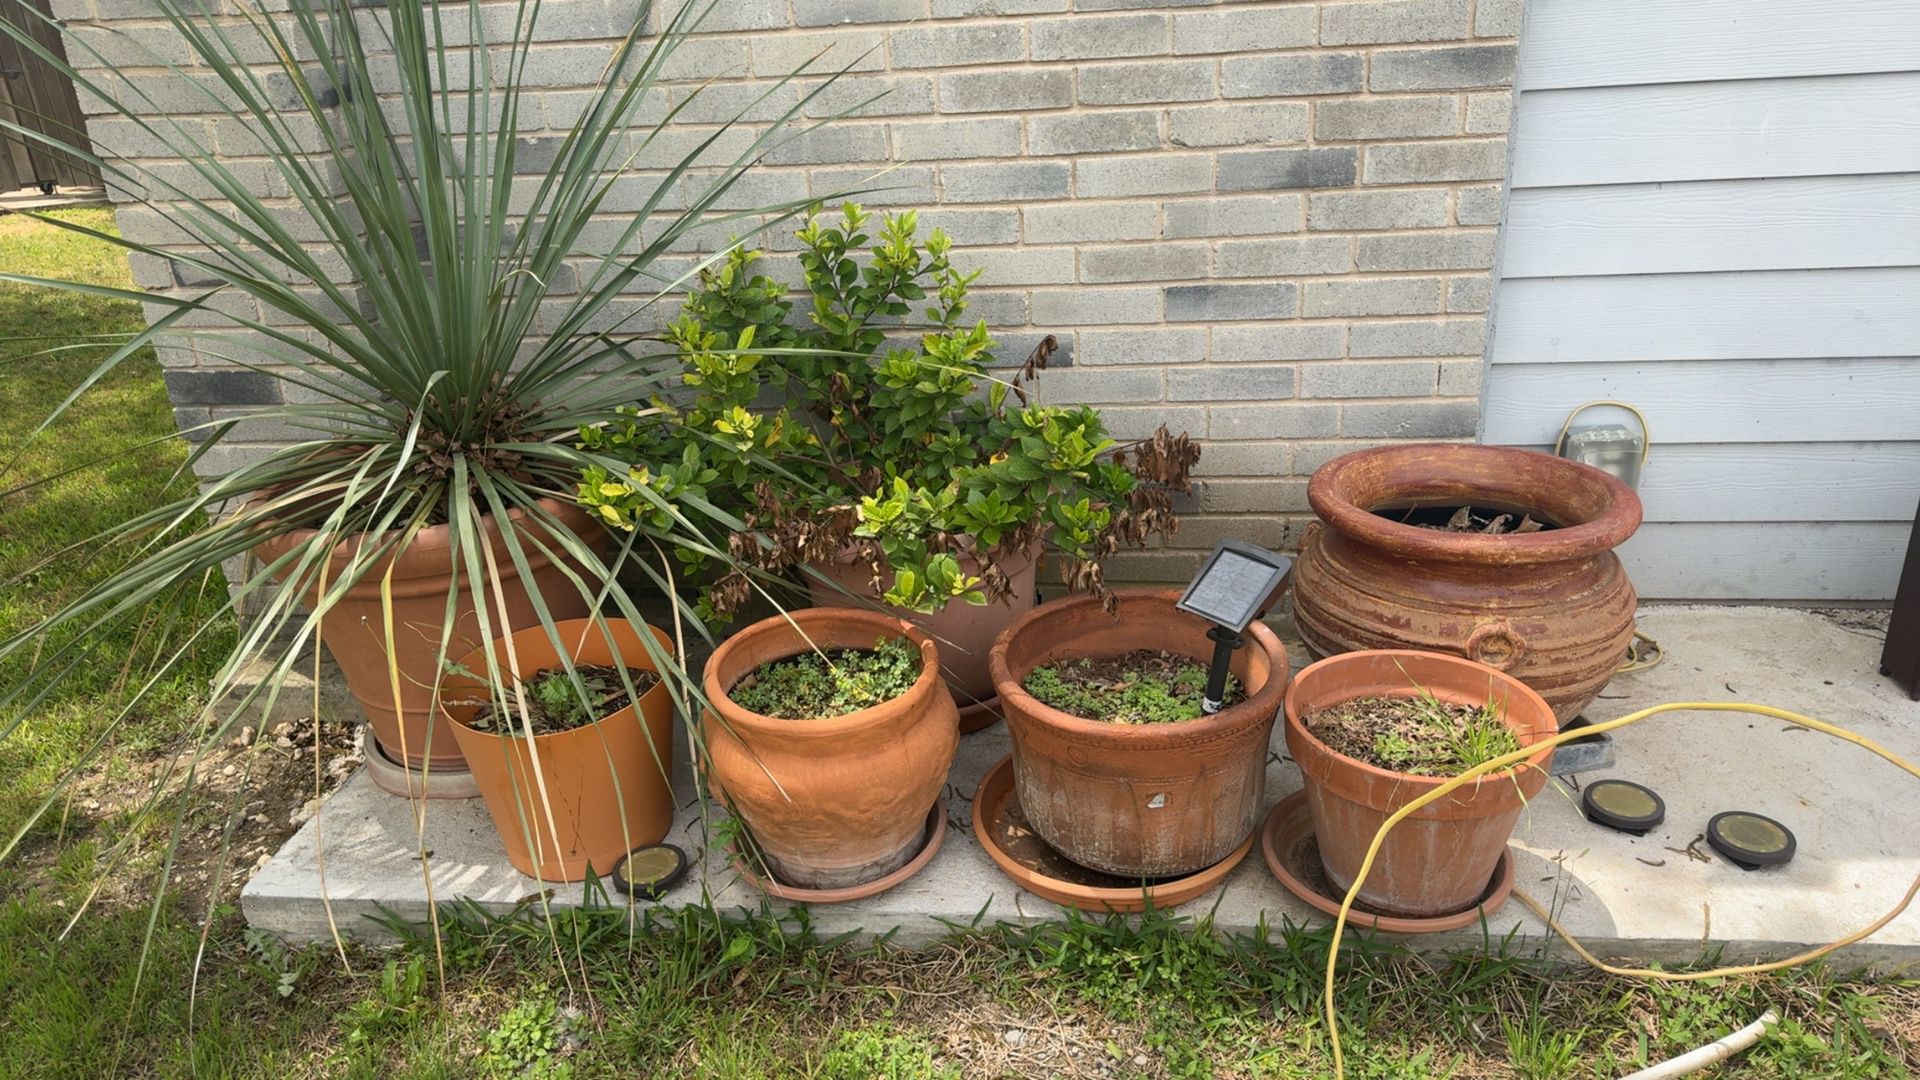 Pots and Fountain for Sale.